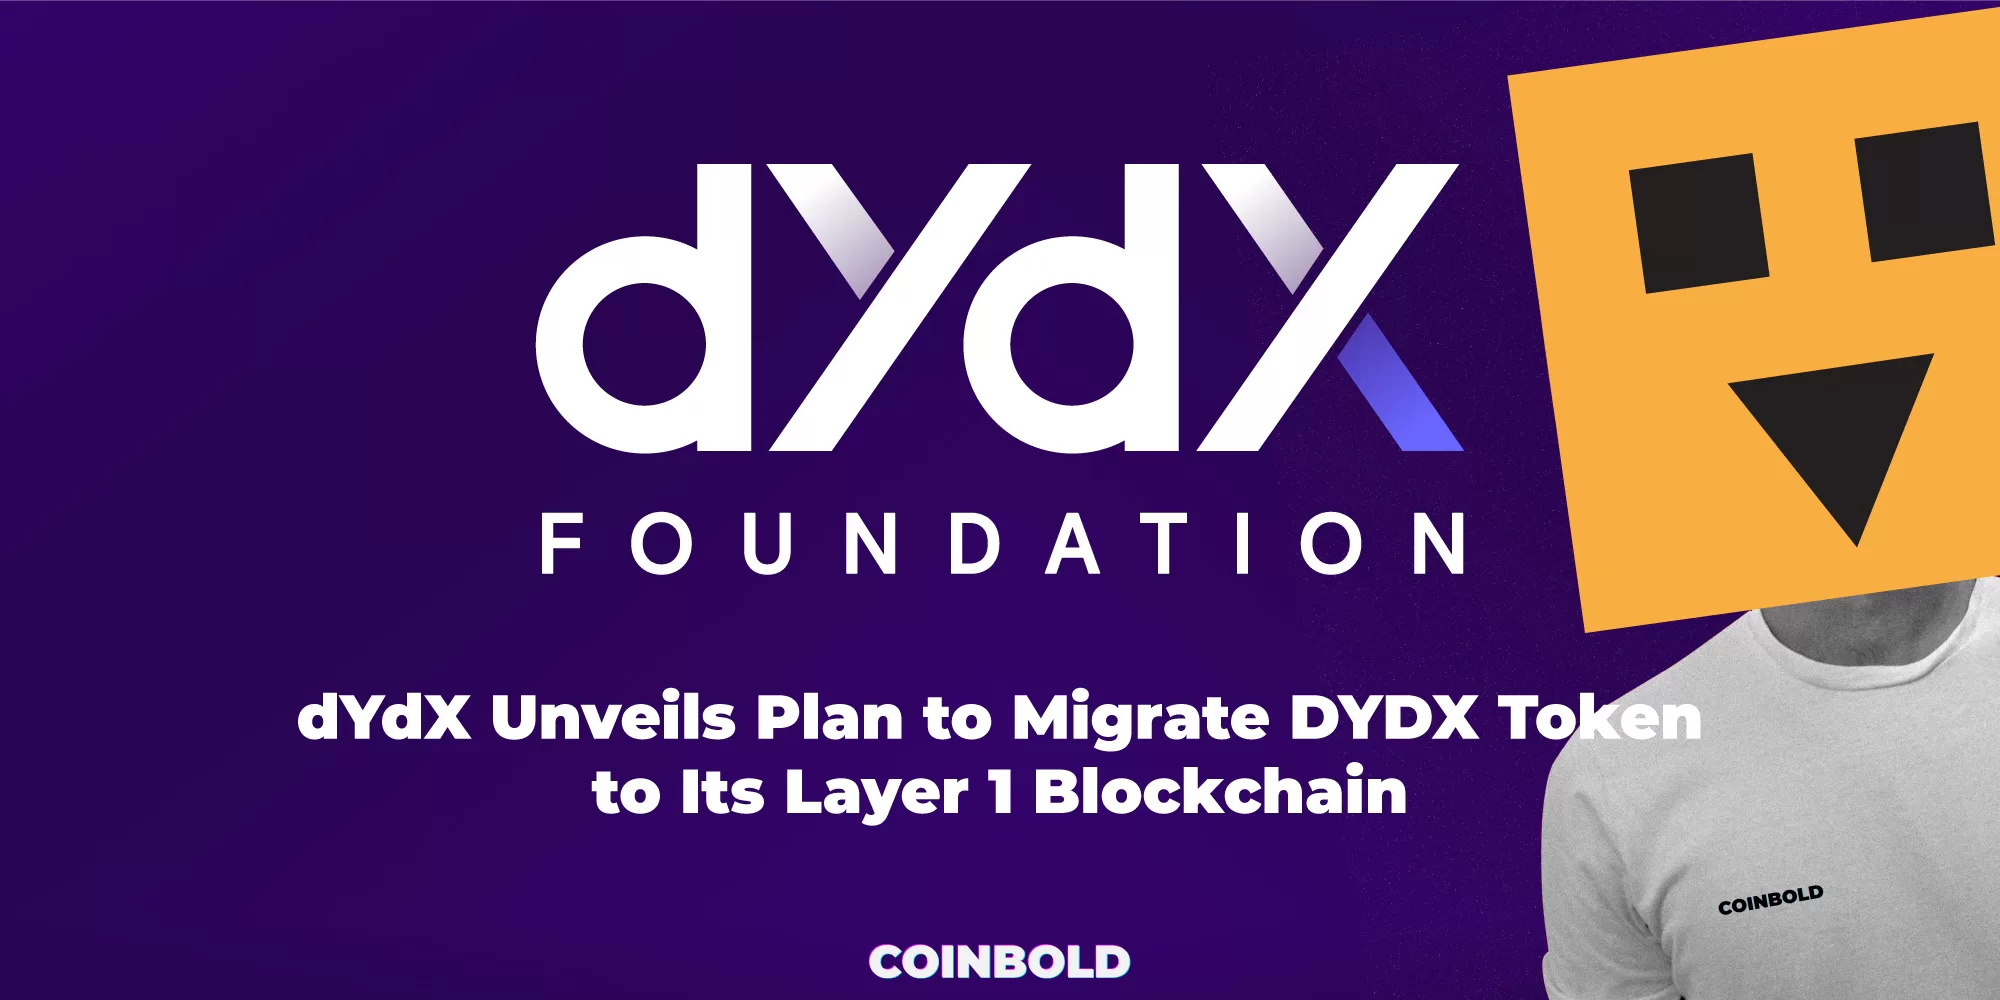 dYdX Unveils Plan to Migrate DYDX Token to Its Layer 1 Blockchain